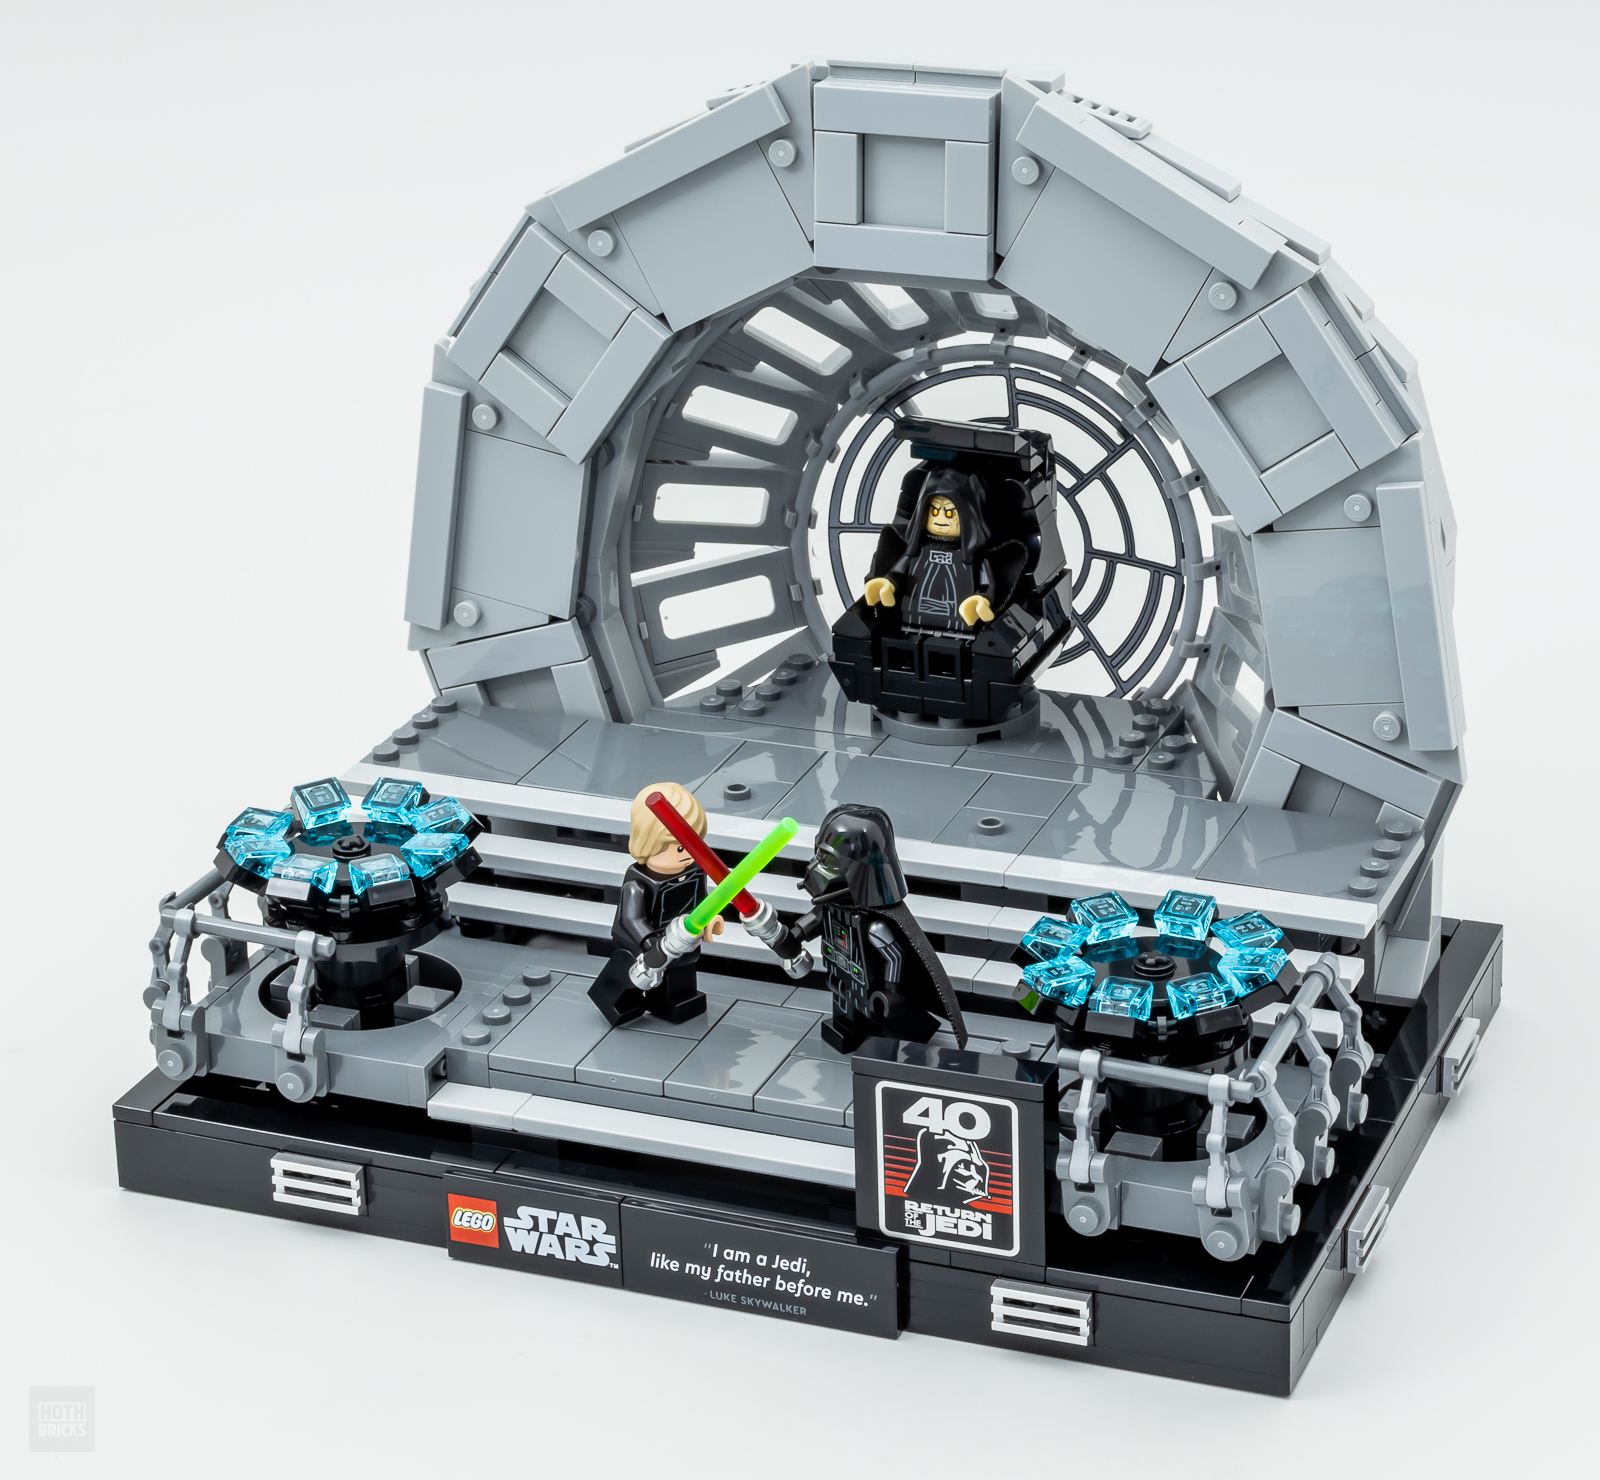 New Lego Star Wars Diorama sets are slices of the films brought to